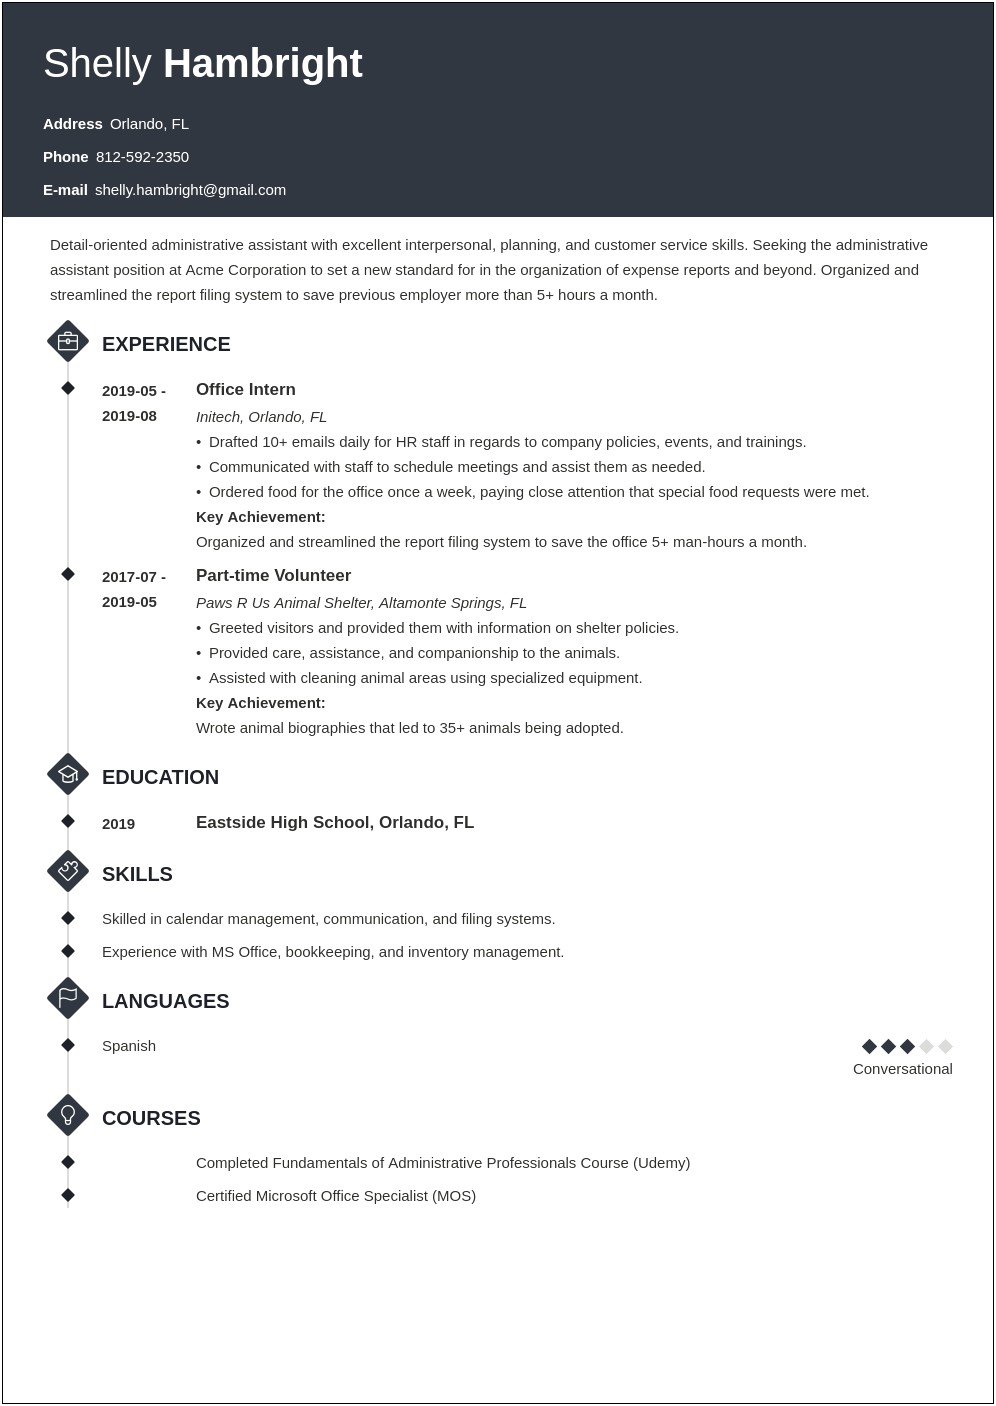 Office Assistant Resume Sample In India